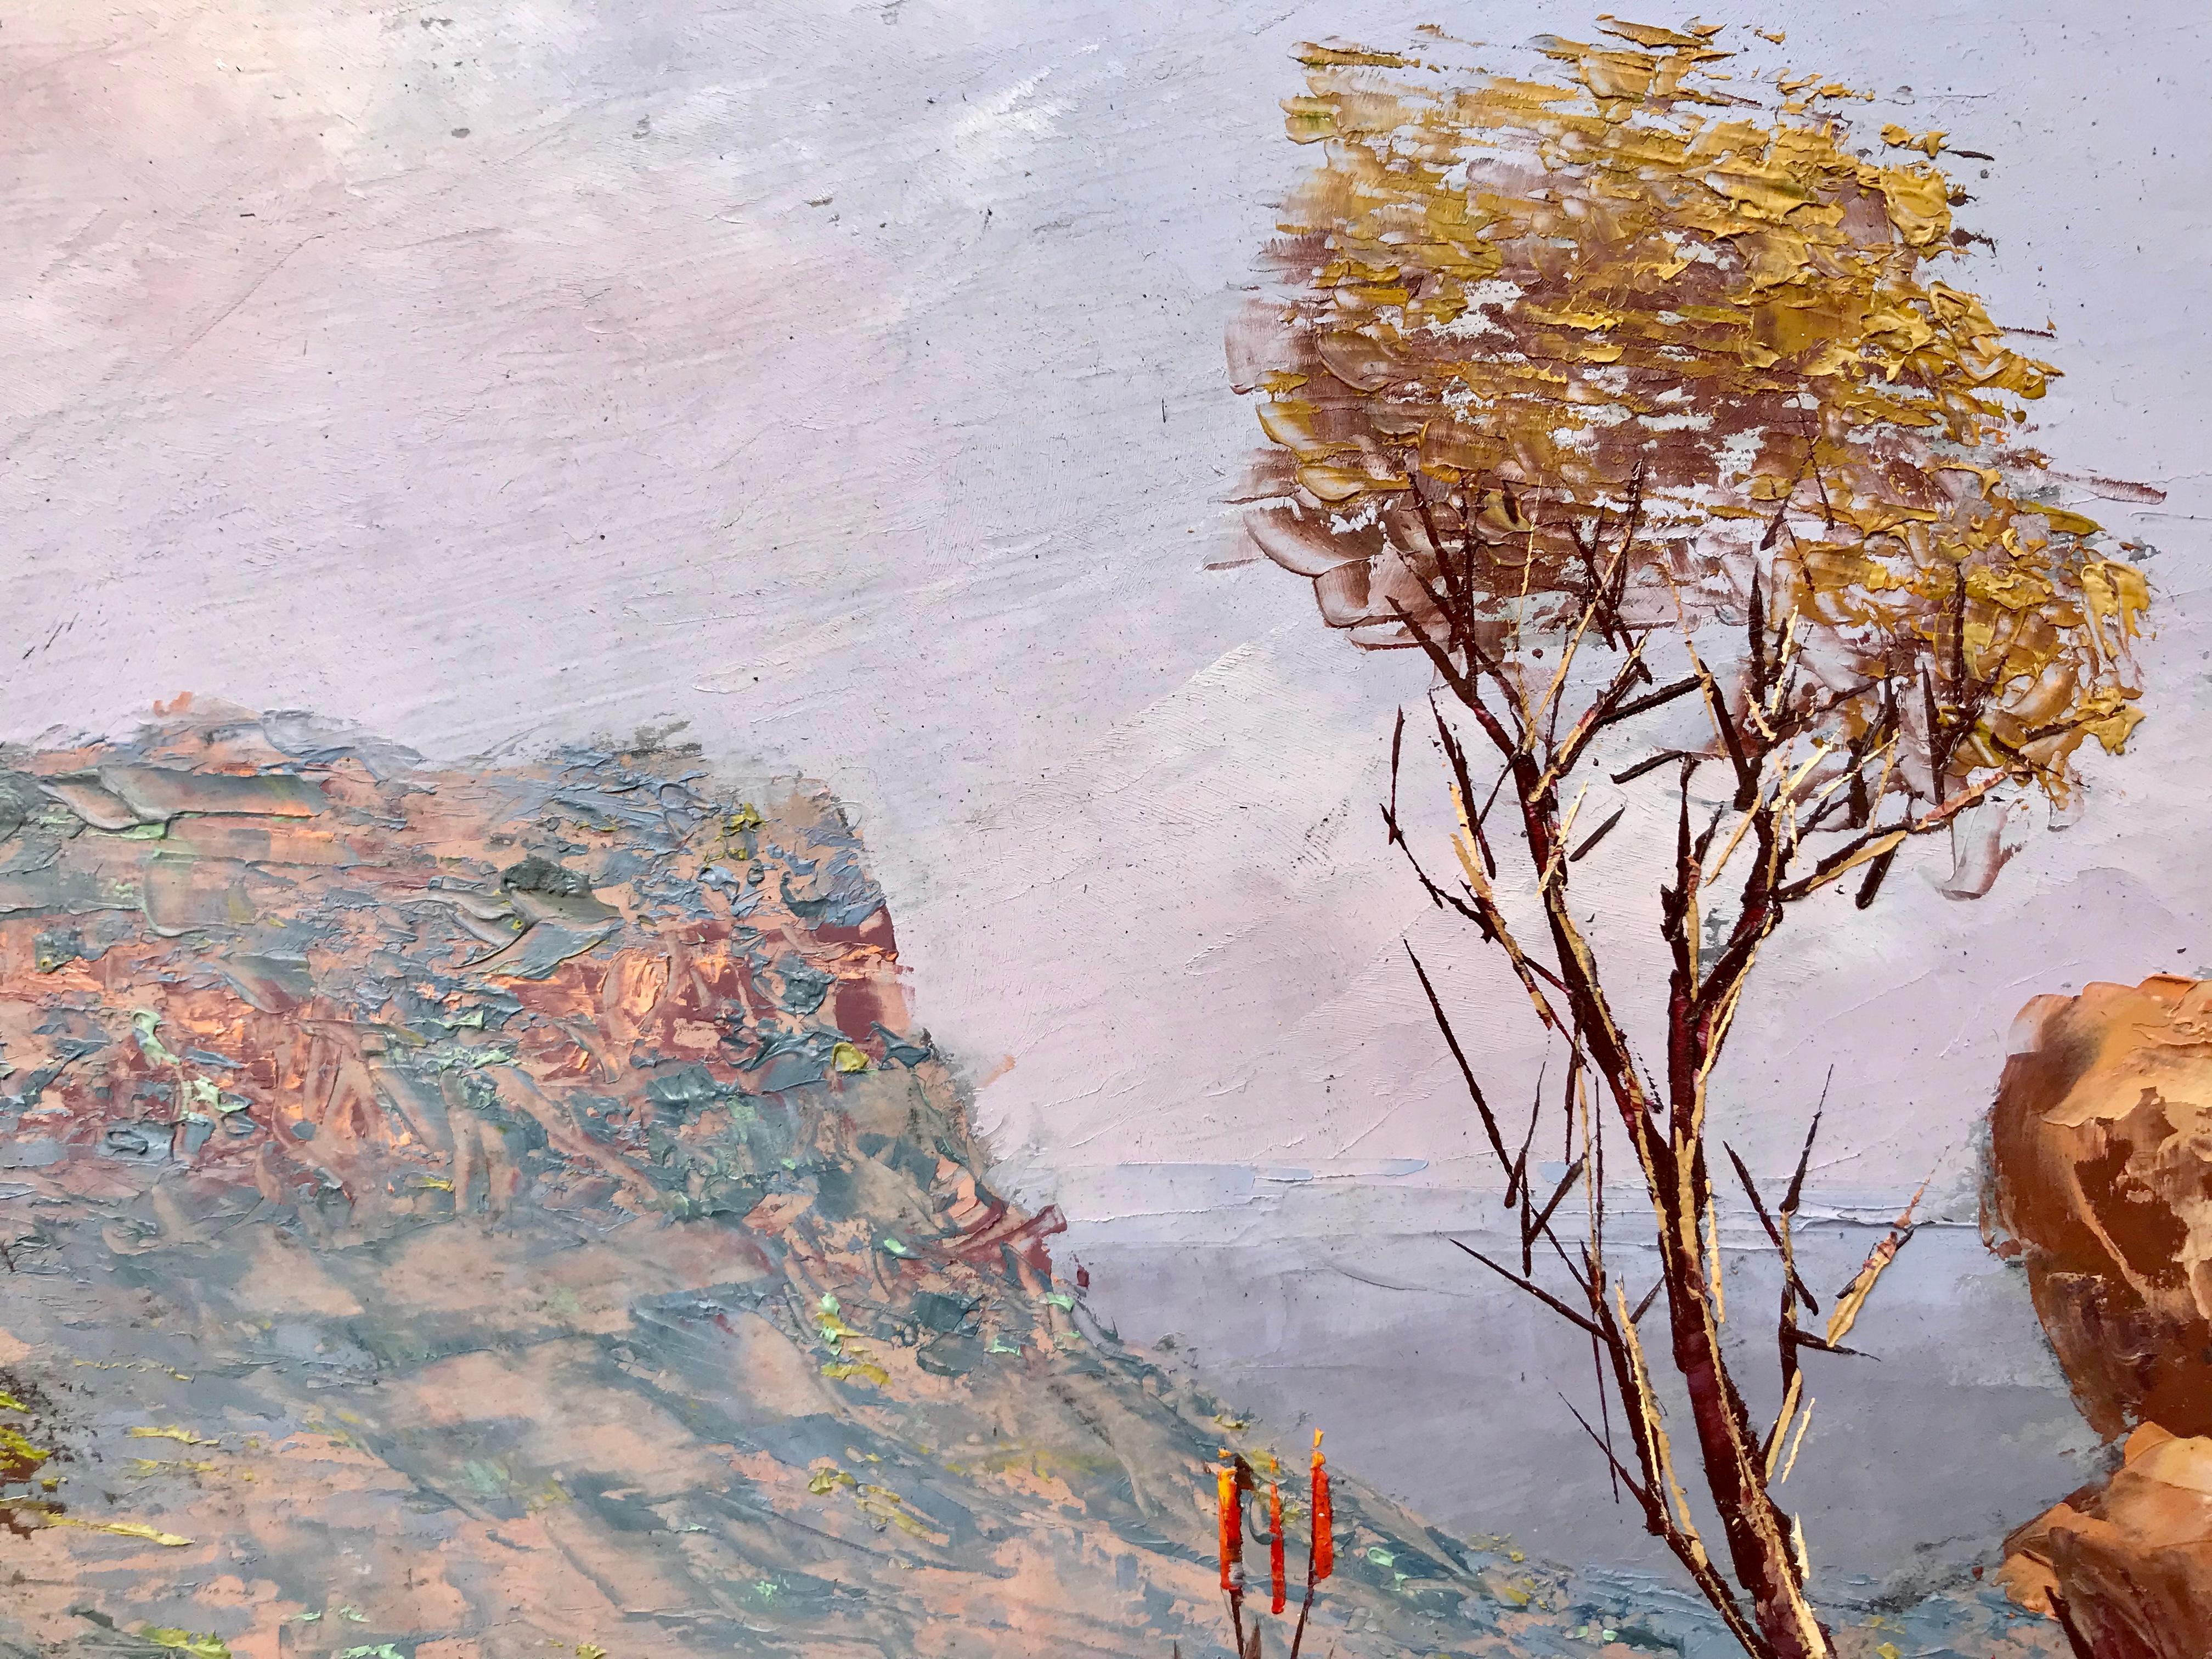 “God’s Window, South Africa” - Post-Impressionist Painting by Henry Bredenkamp